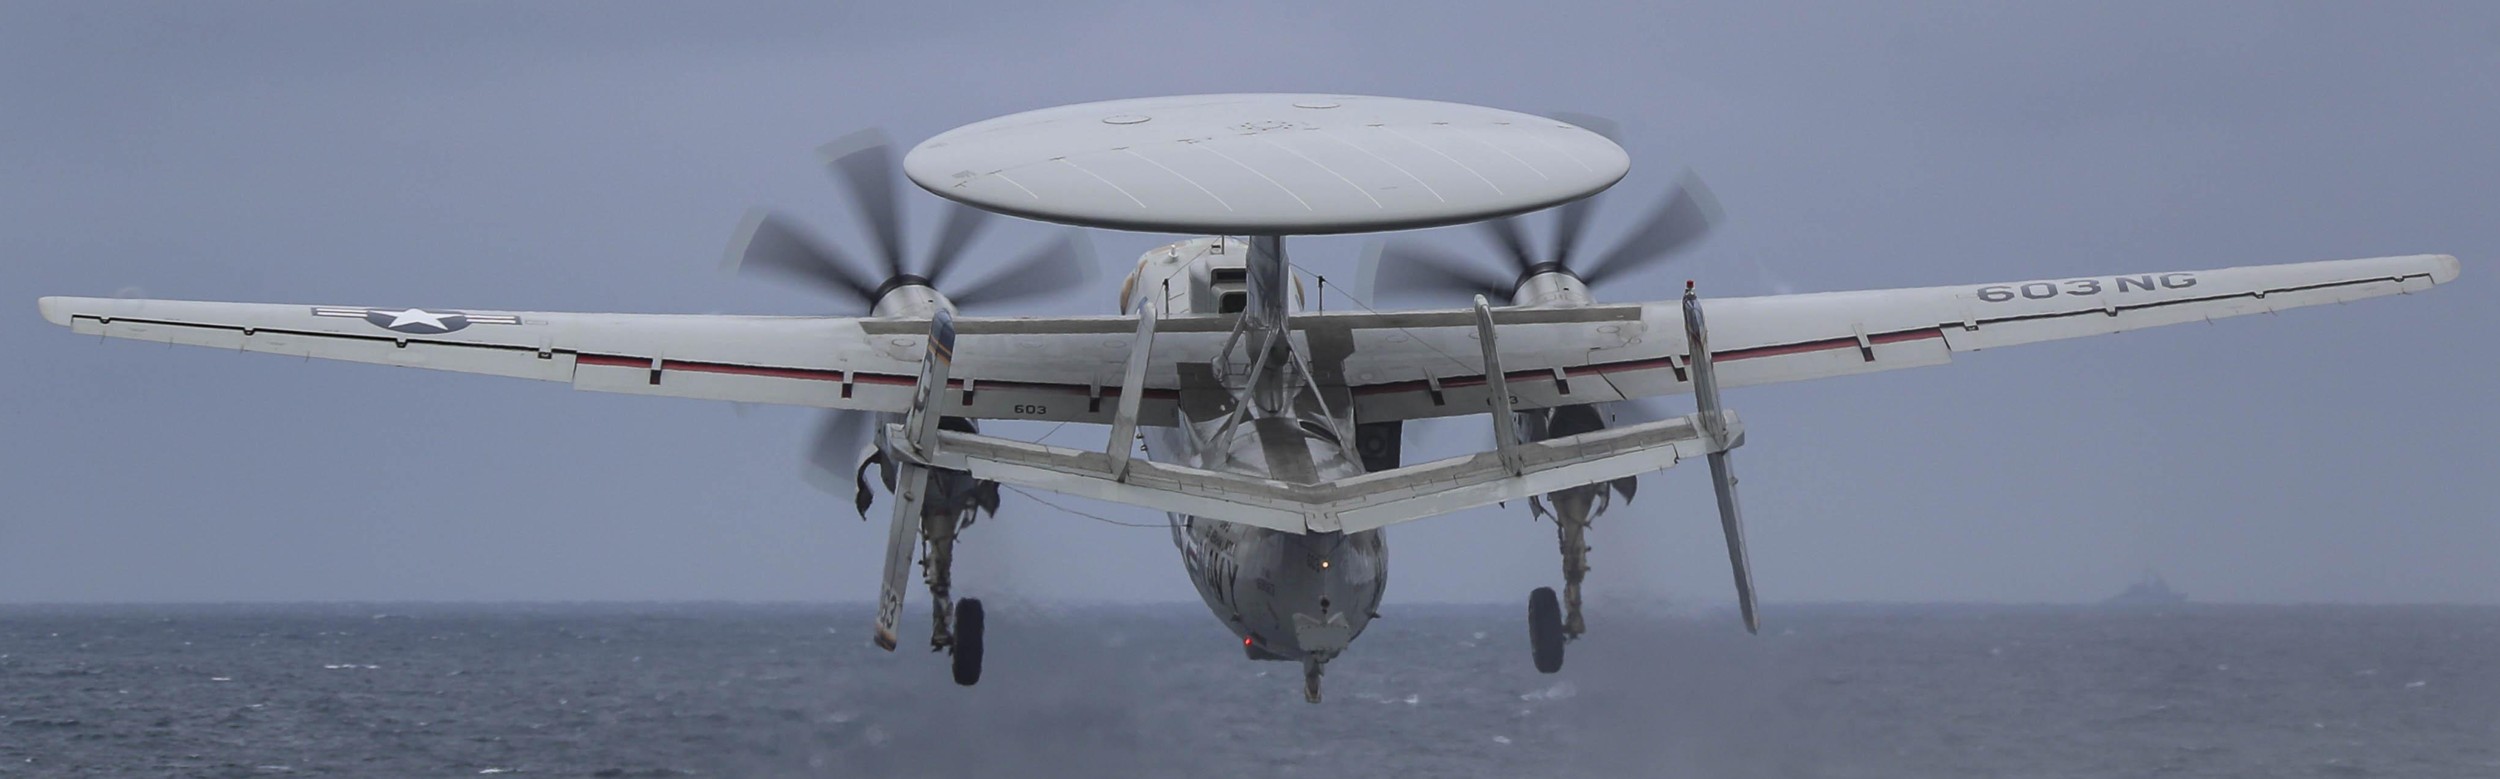 vaw-117 wallbangers airborne command and control squadron navy e-2d hawkeye cvw-9 uss abraham lincoln cvn-72 20